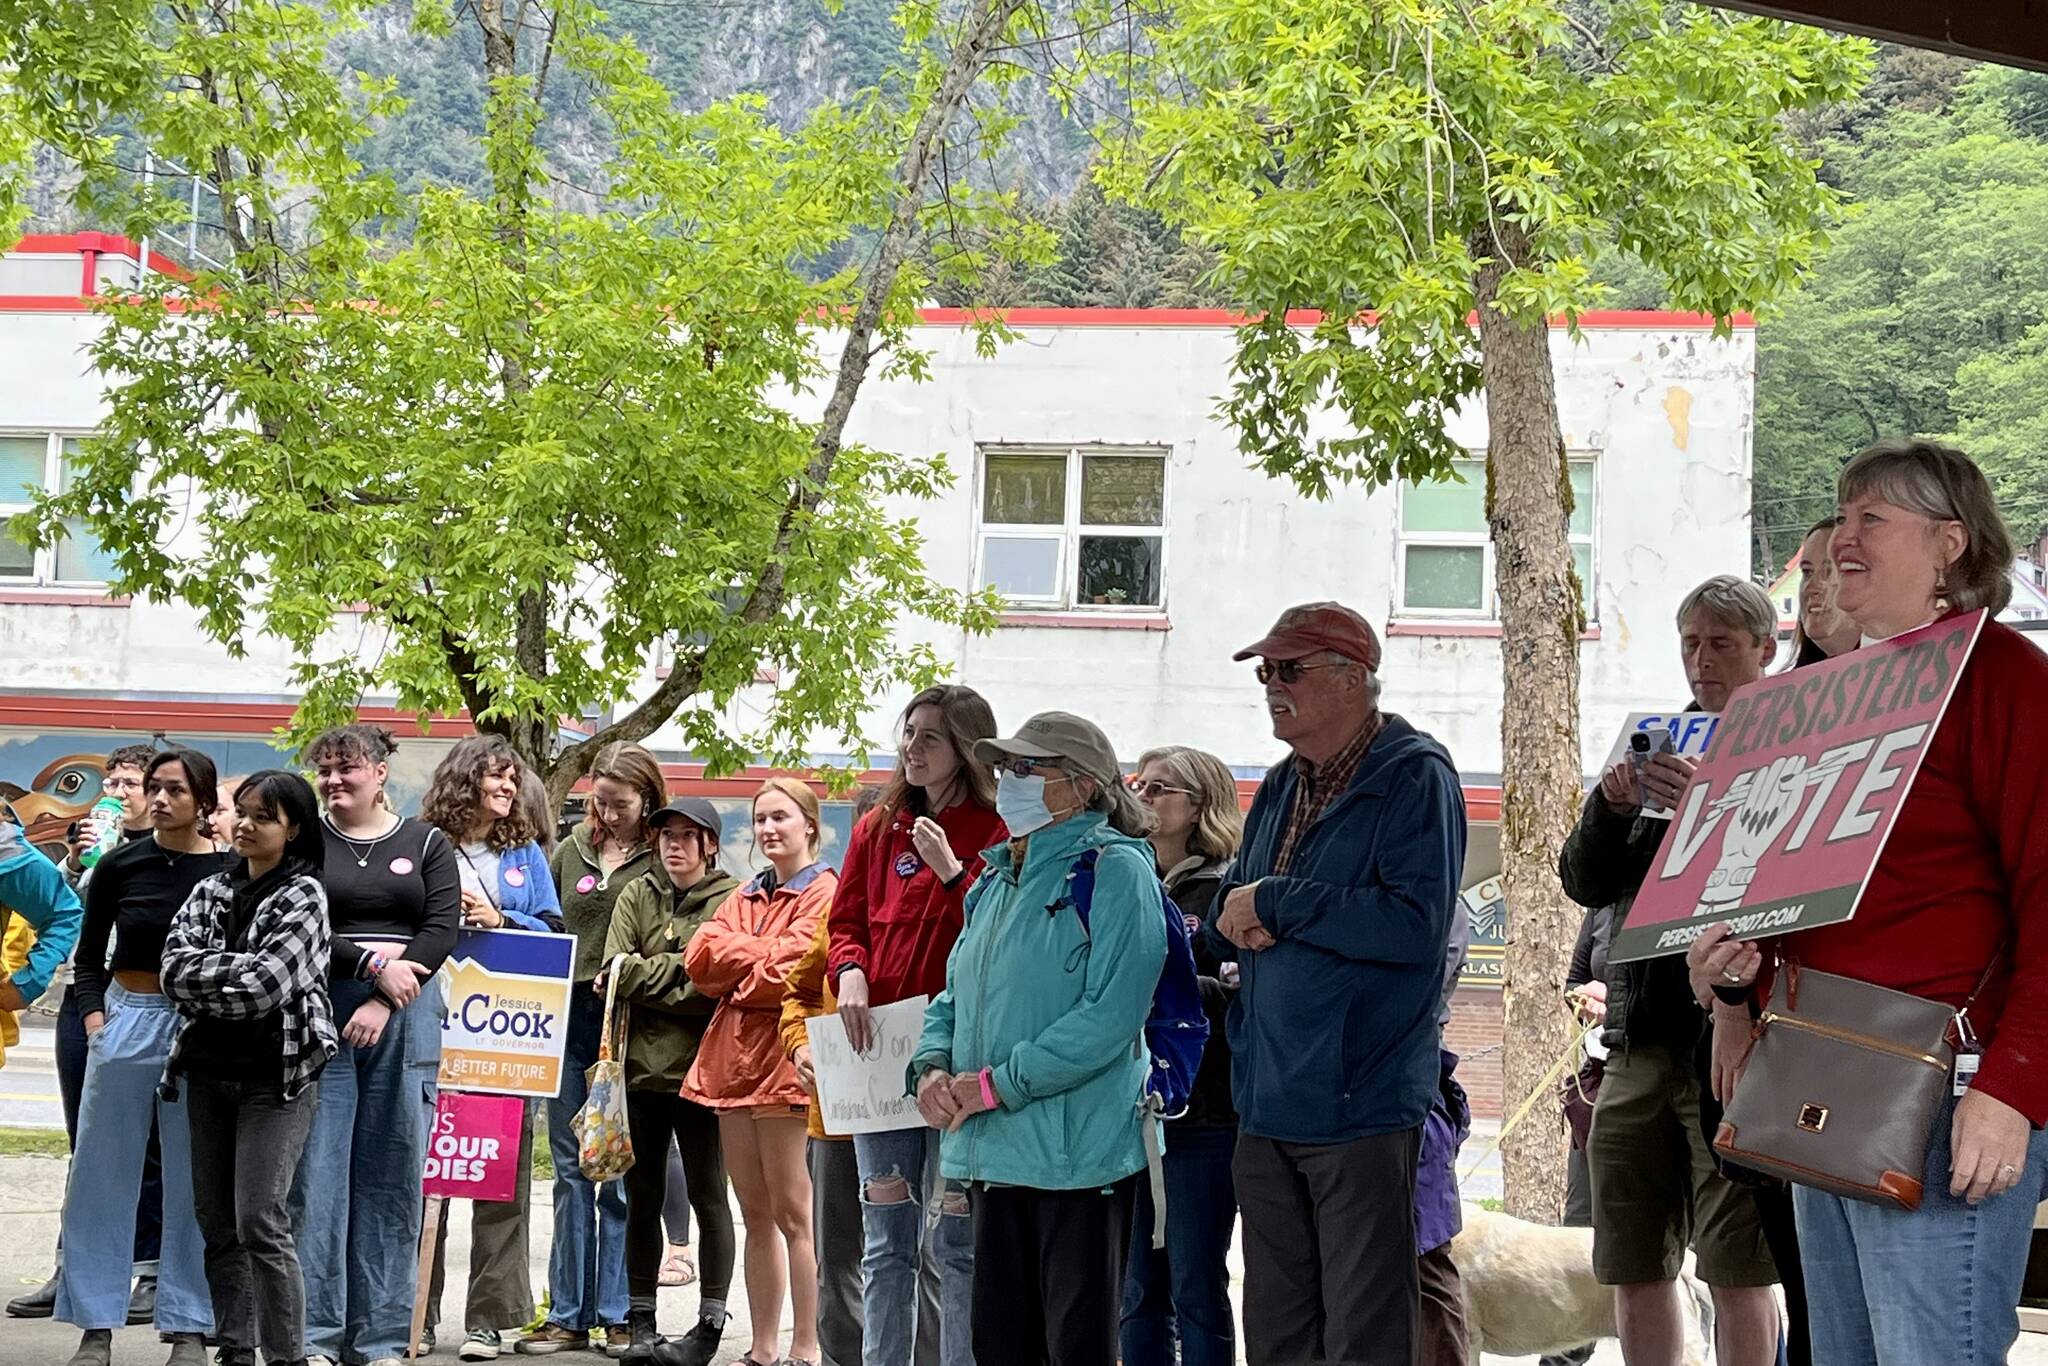 People gathered at rally listening to key note speakers with signs proudly displayed in support of pro-abortion rights. (Jonson Kuhn / Juneau Empire)